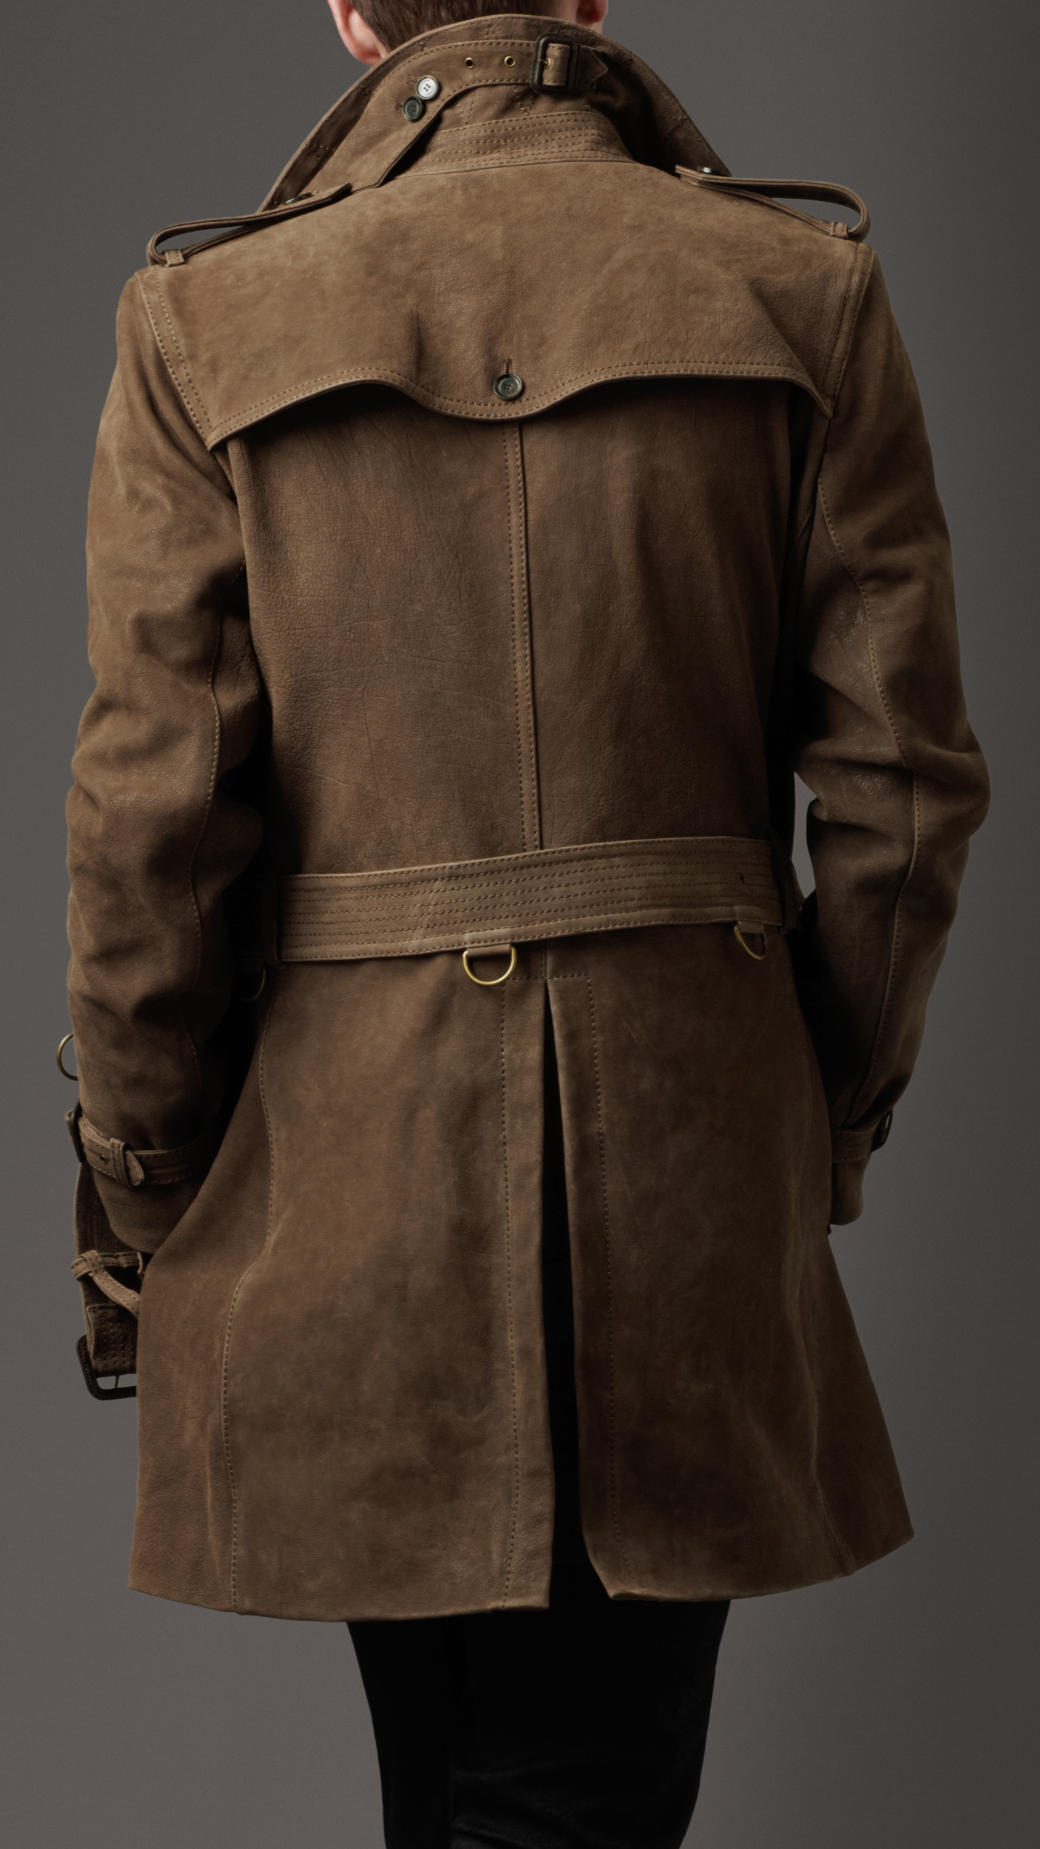 Burberry Suede Trench Coat in Brown for Men - Lyst